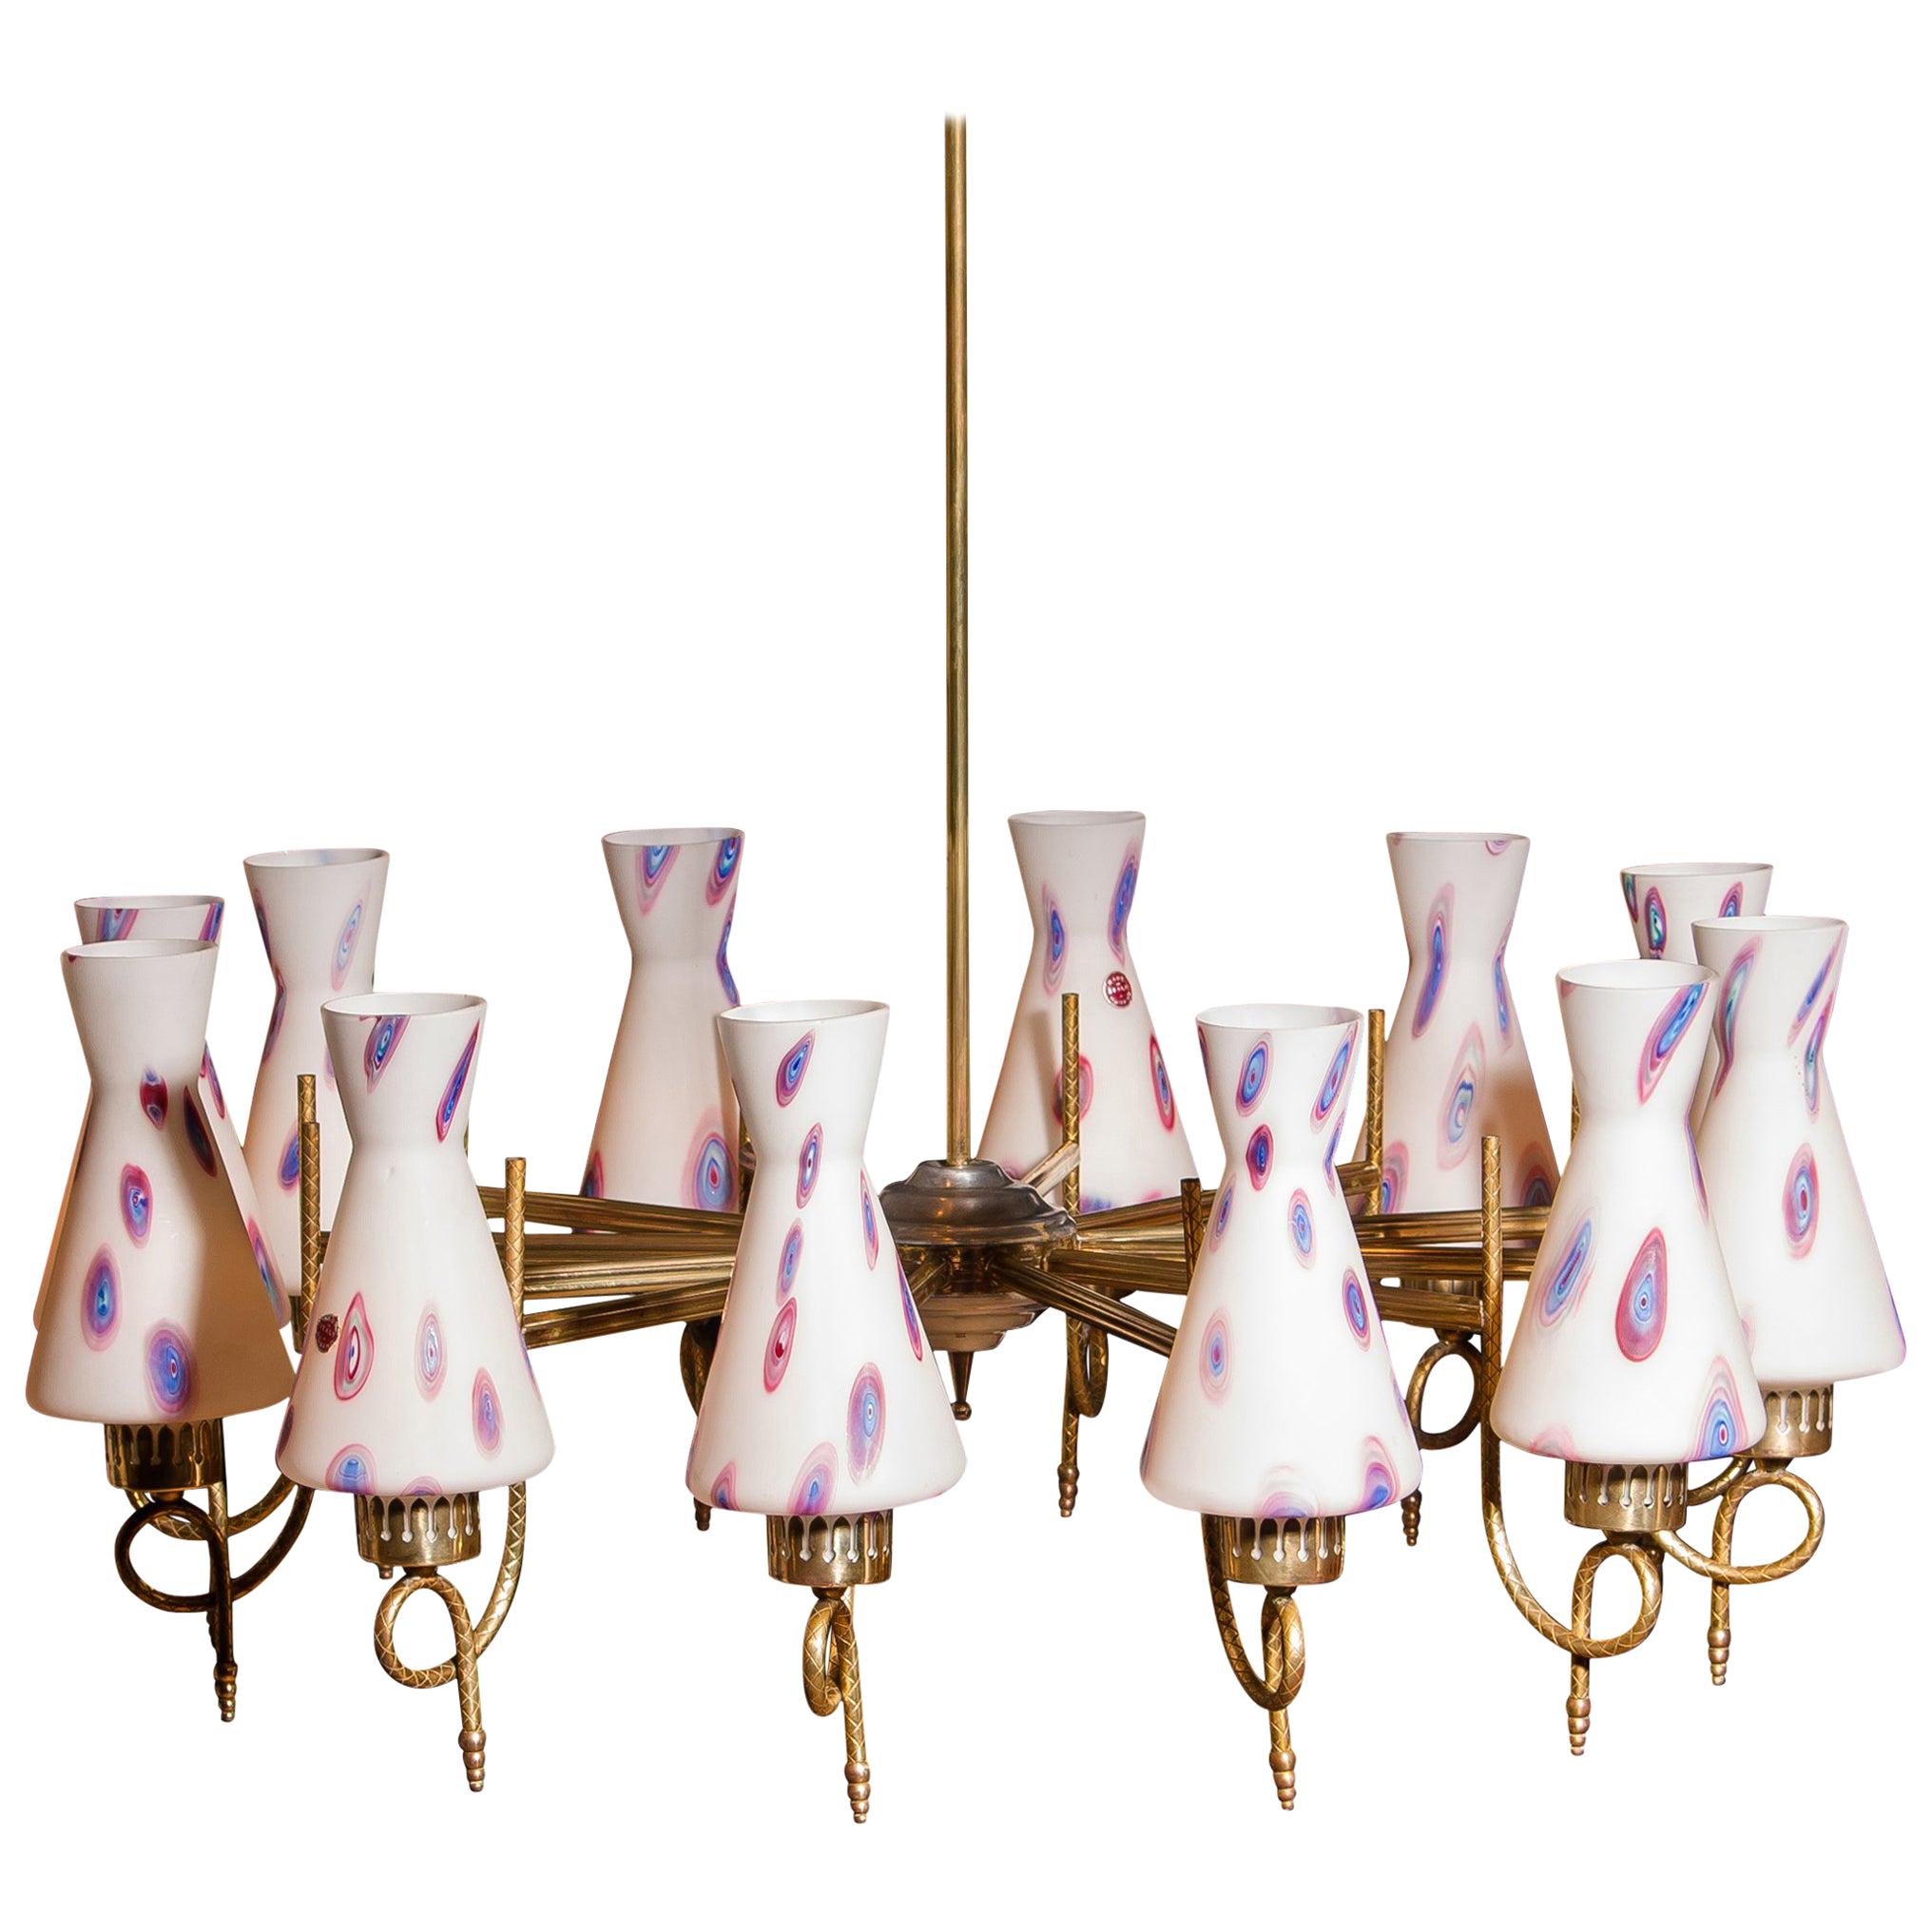 Magnificent large chandelier.
This lamp is made of a beautiful brass with polished aluminum shape with twelve white designed Murano glass shades and made by Stilnovo.
Dimensions: H 90 cm, ø 80 cm.
Technically 100%.